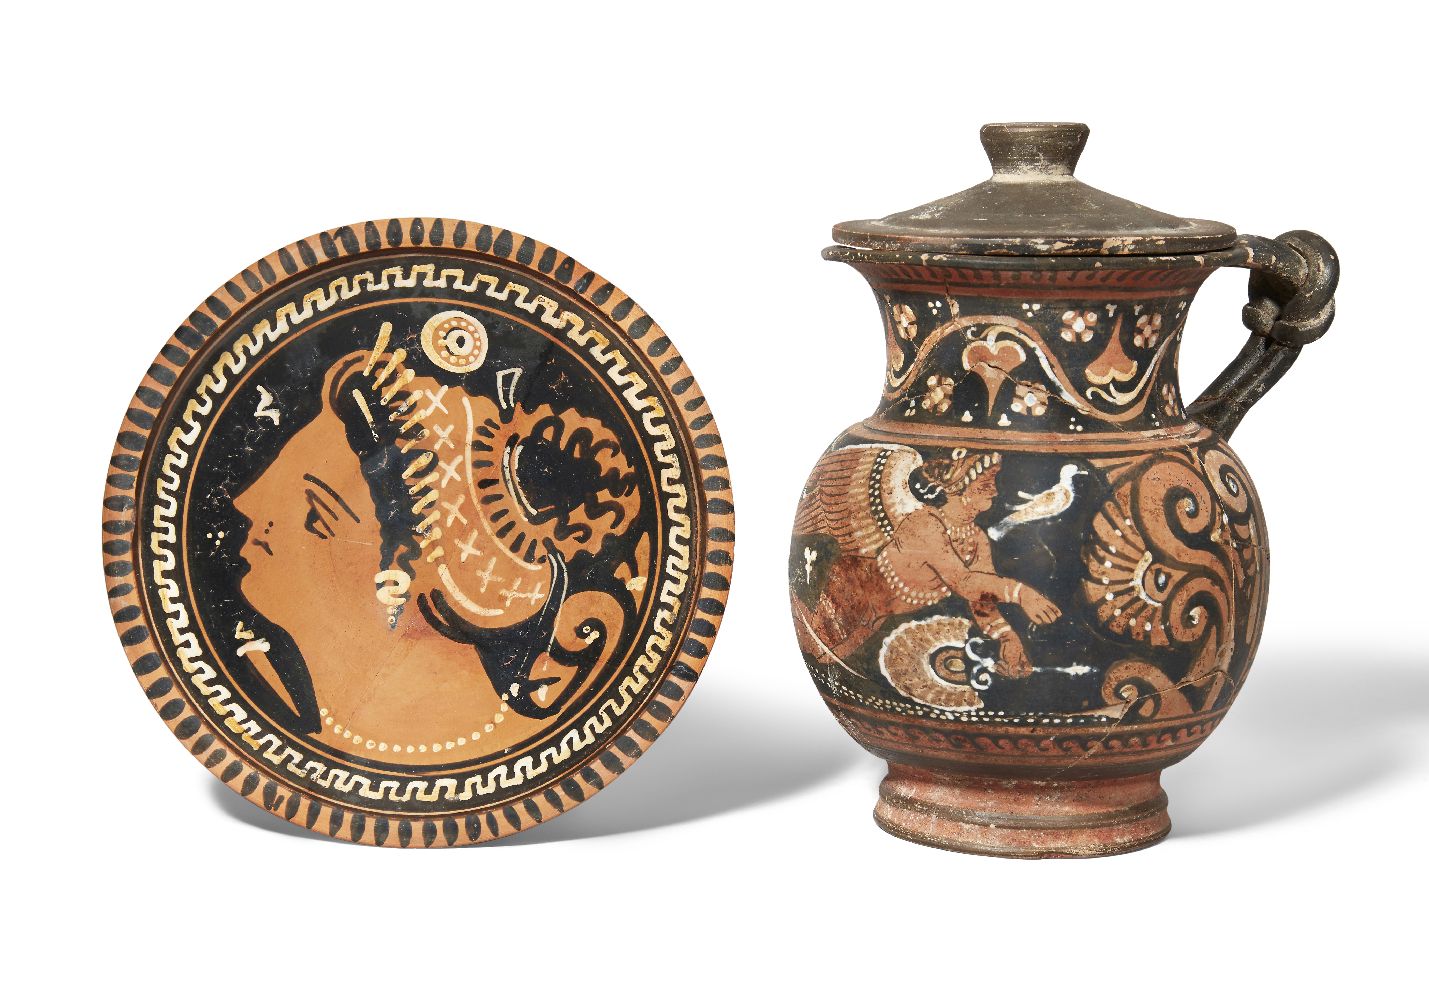 An Apulian red-figure mug with knotted handle, the front decorated with a winged figure of eros